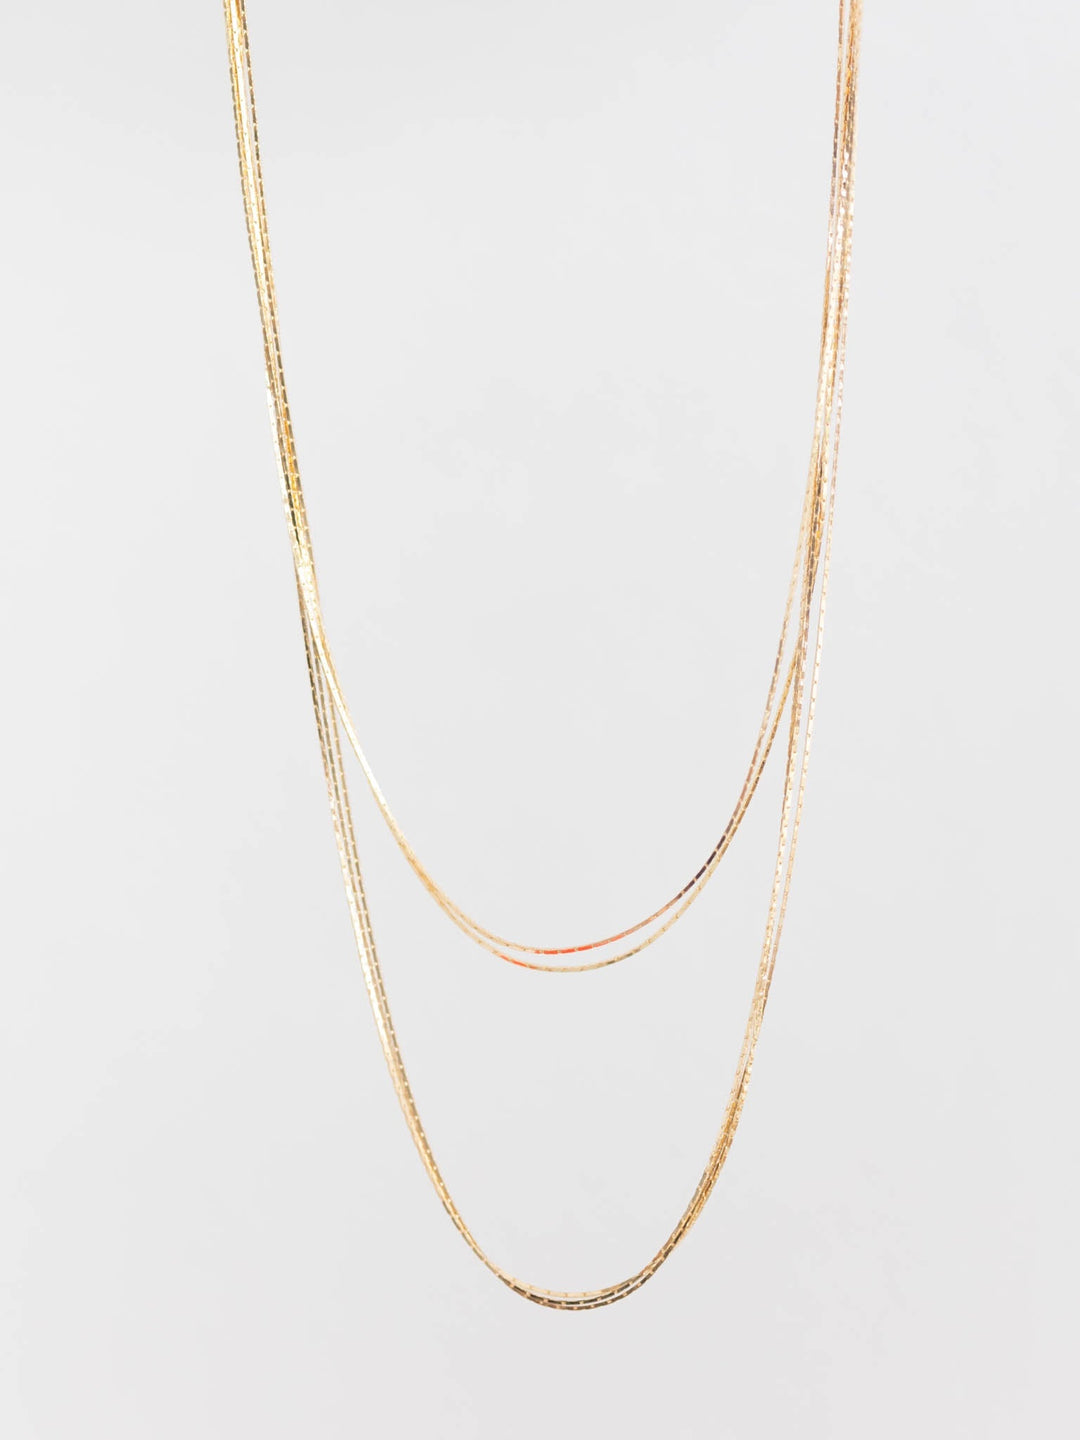 Layered Dainty Chain NecklaceNecklace